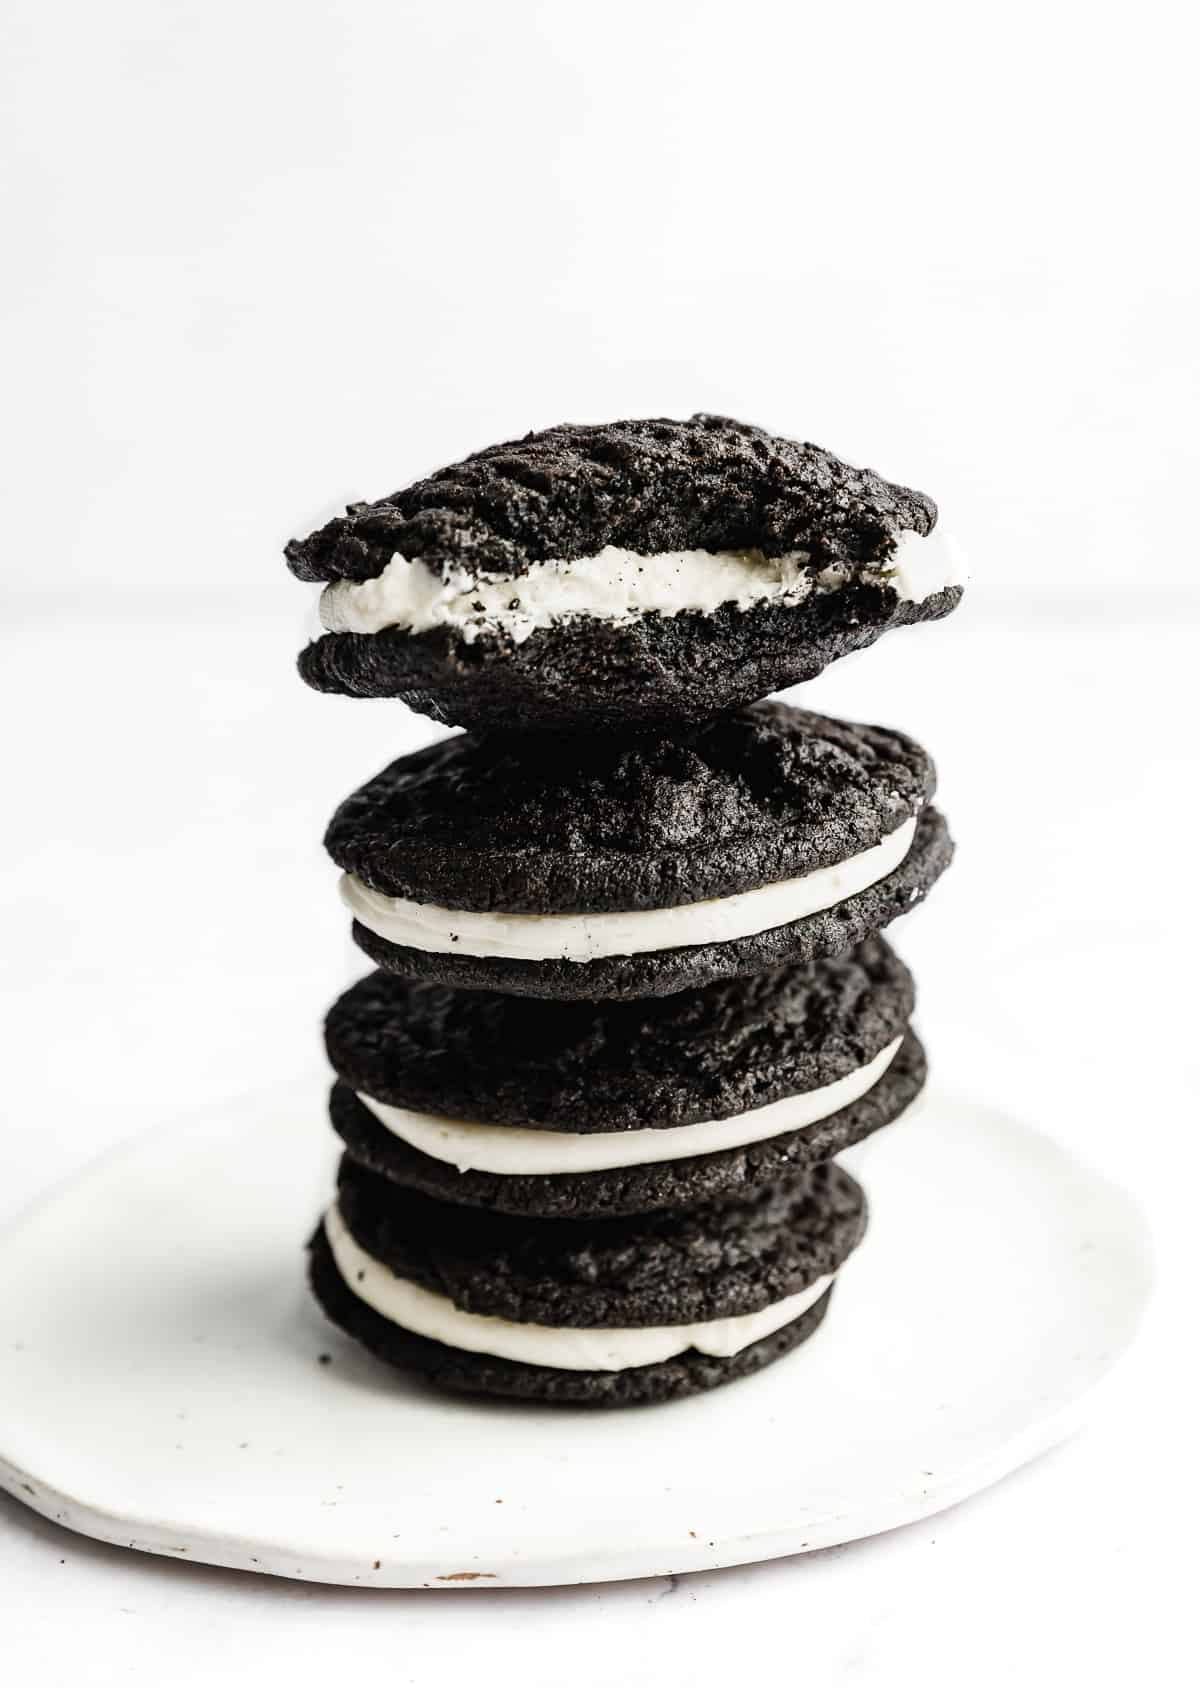 Four Homemade Oreo Cookies stacked on top of each other on a white plate.